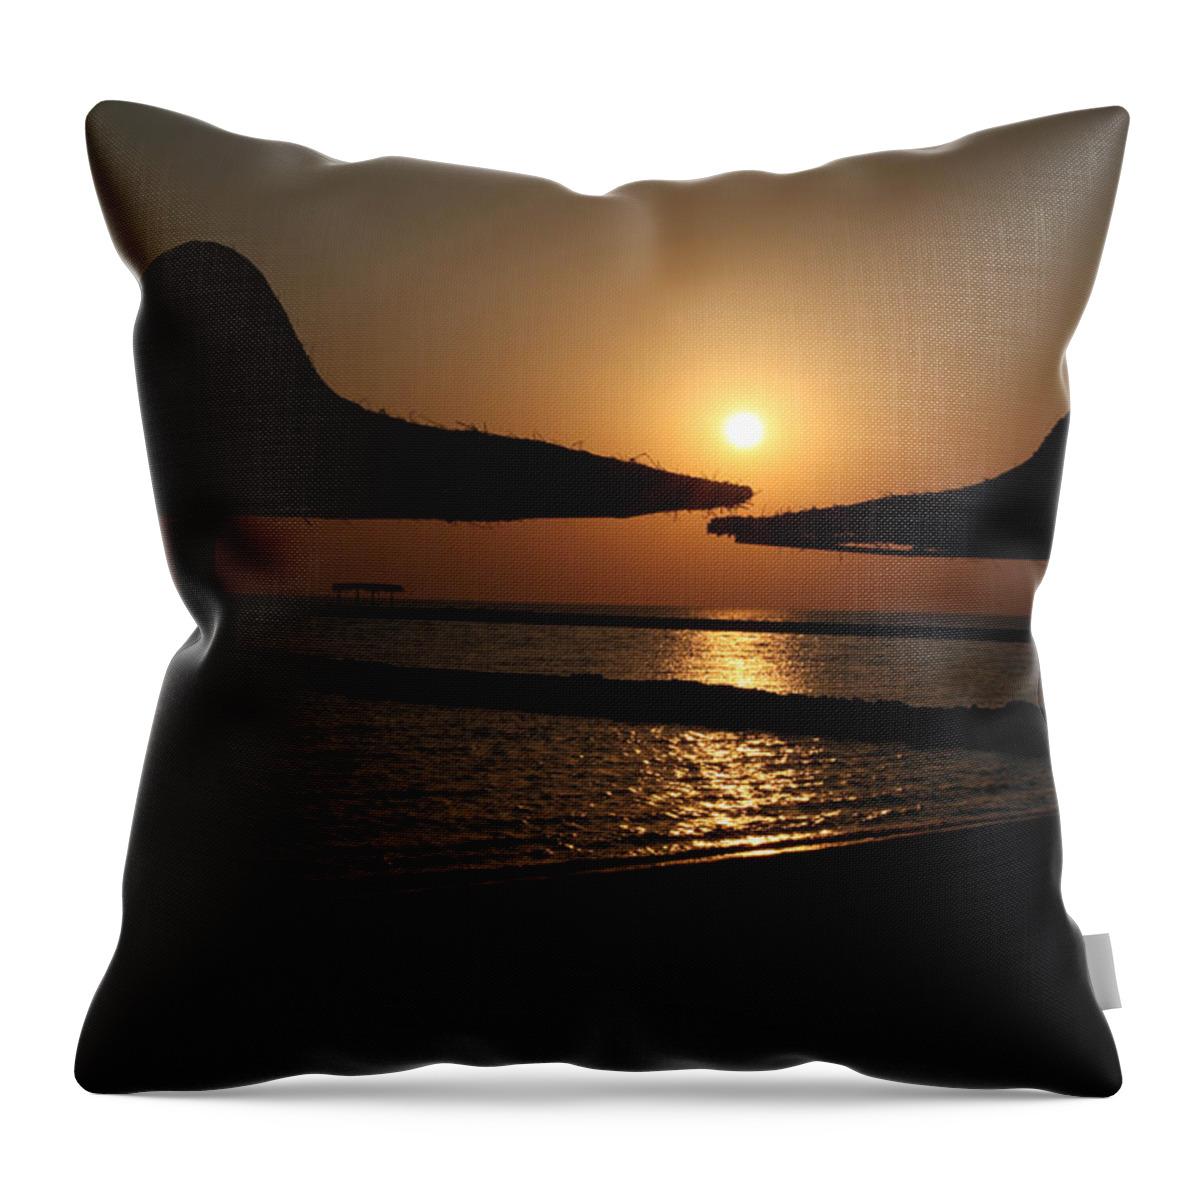 Al-ahyaa Throw Pillow featuring the photograph Shuldersol by Jez C Self